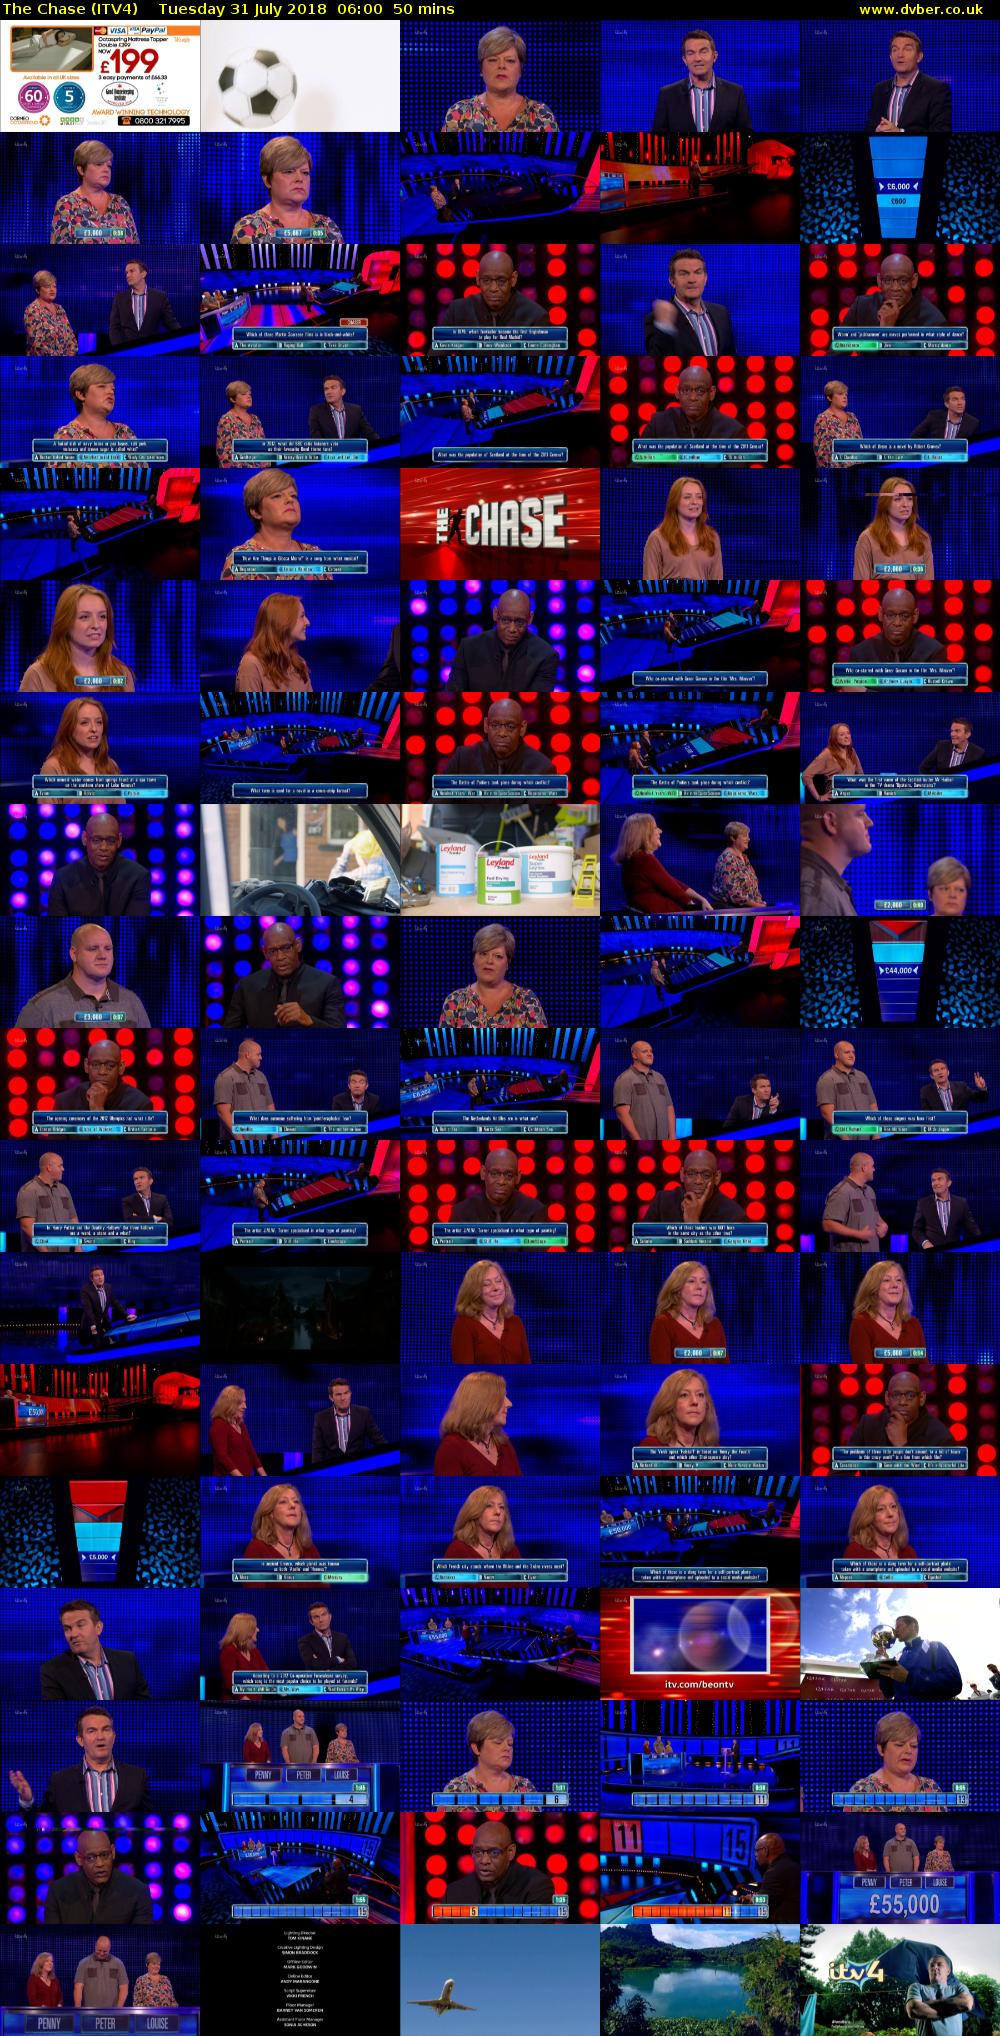 The Chase (ITV4) Tuesday 31 July 2018 06:00 - 06:50